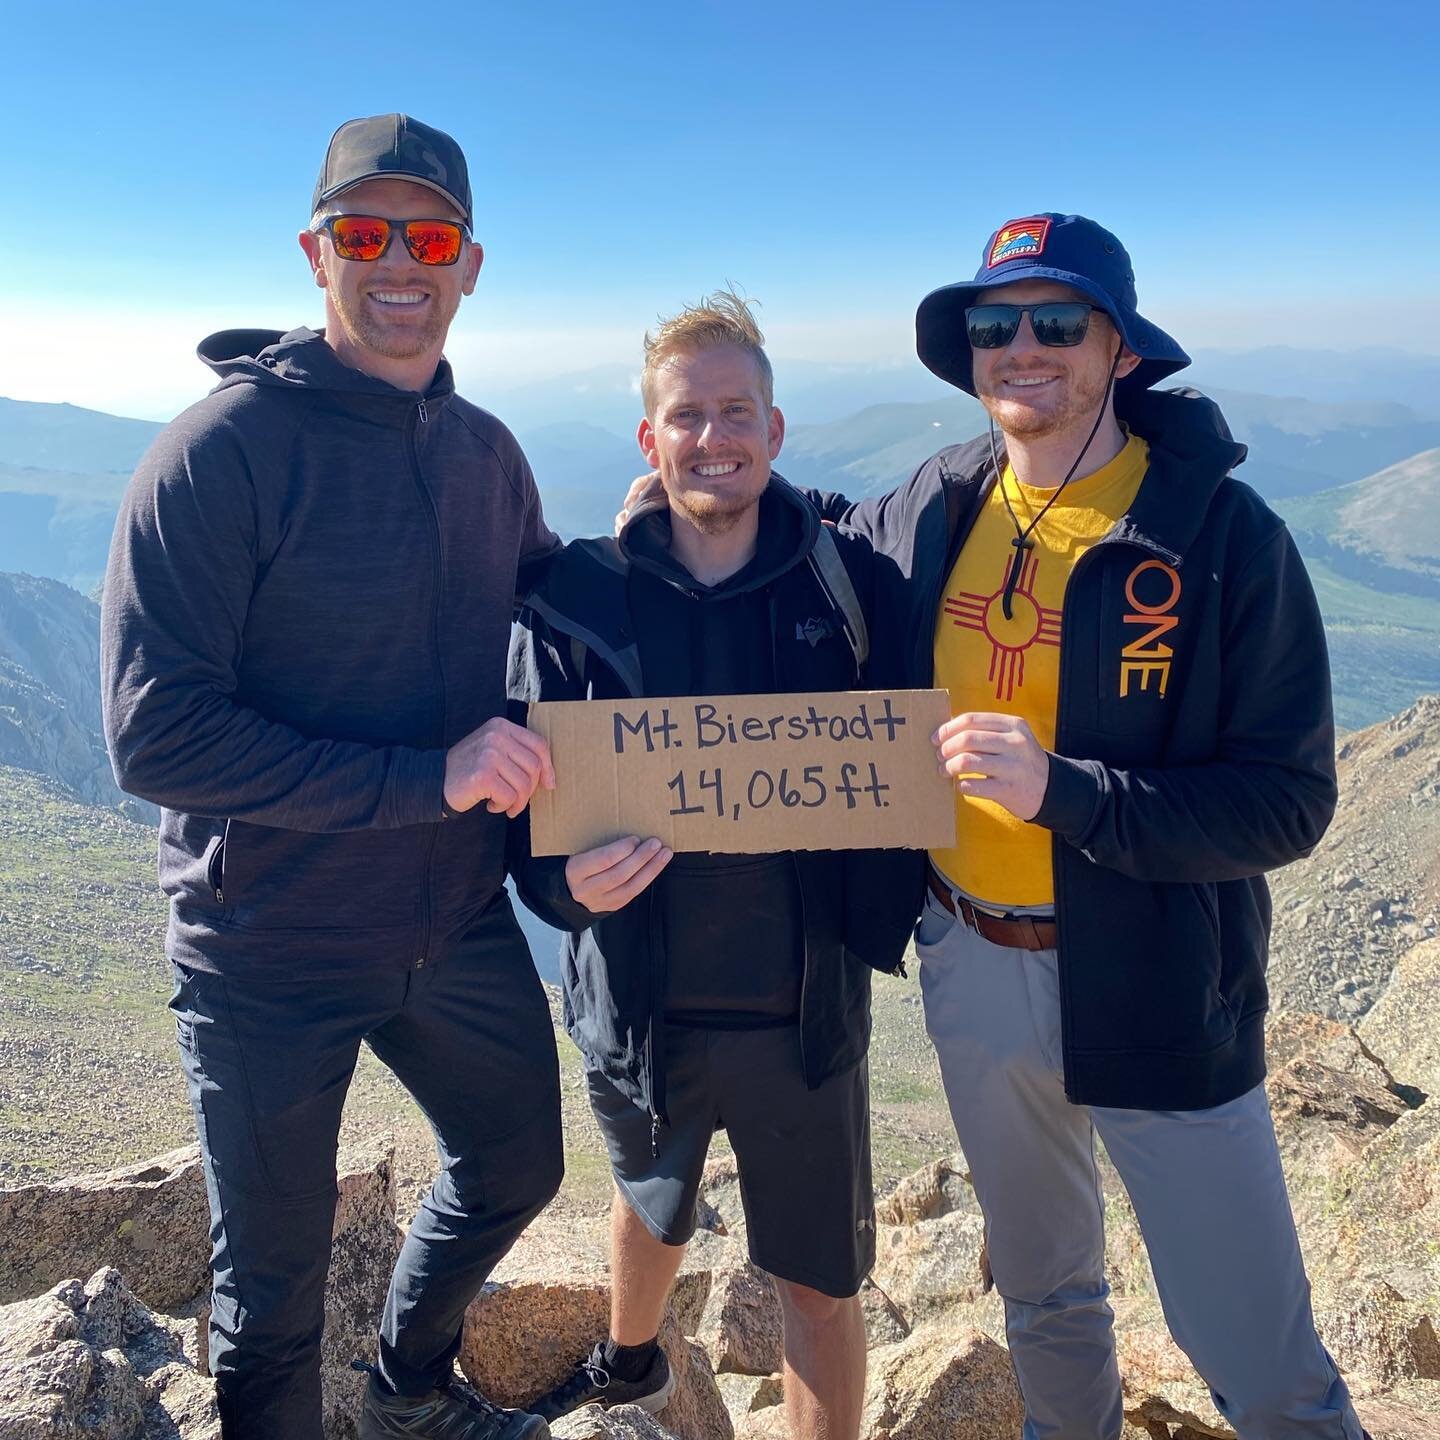 🏔Mt. Bierstadt with my brothers @forseofnatureart &amp; @bjartiss

So grateful we could get out in nature conquer their first 14er together🙏🏼🙏🏼

The Colorado adventures continue!!!

#ForseFactor